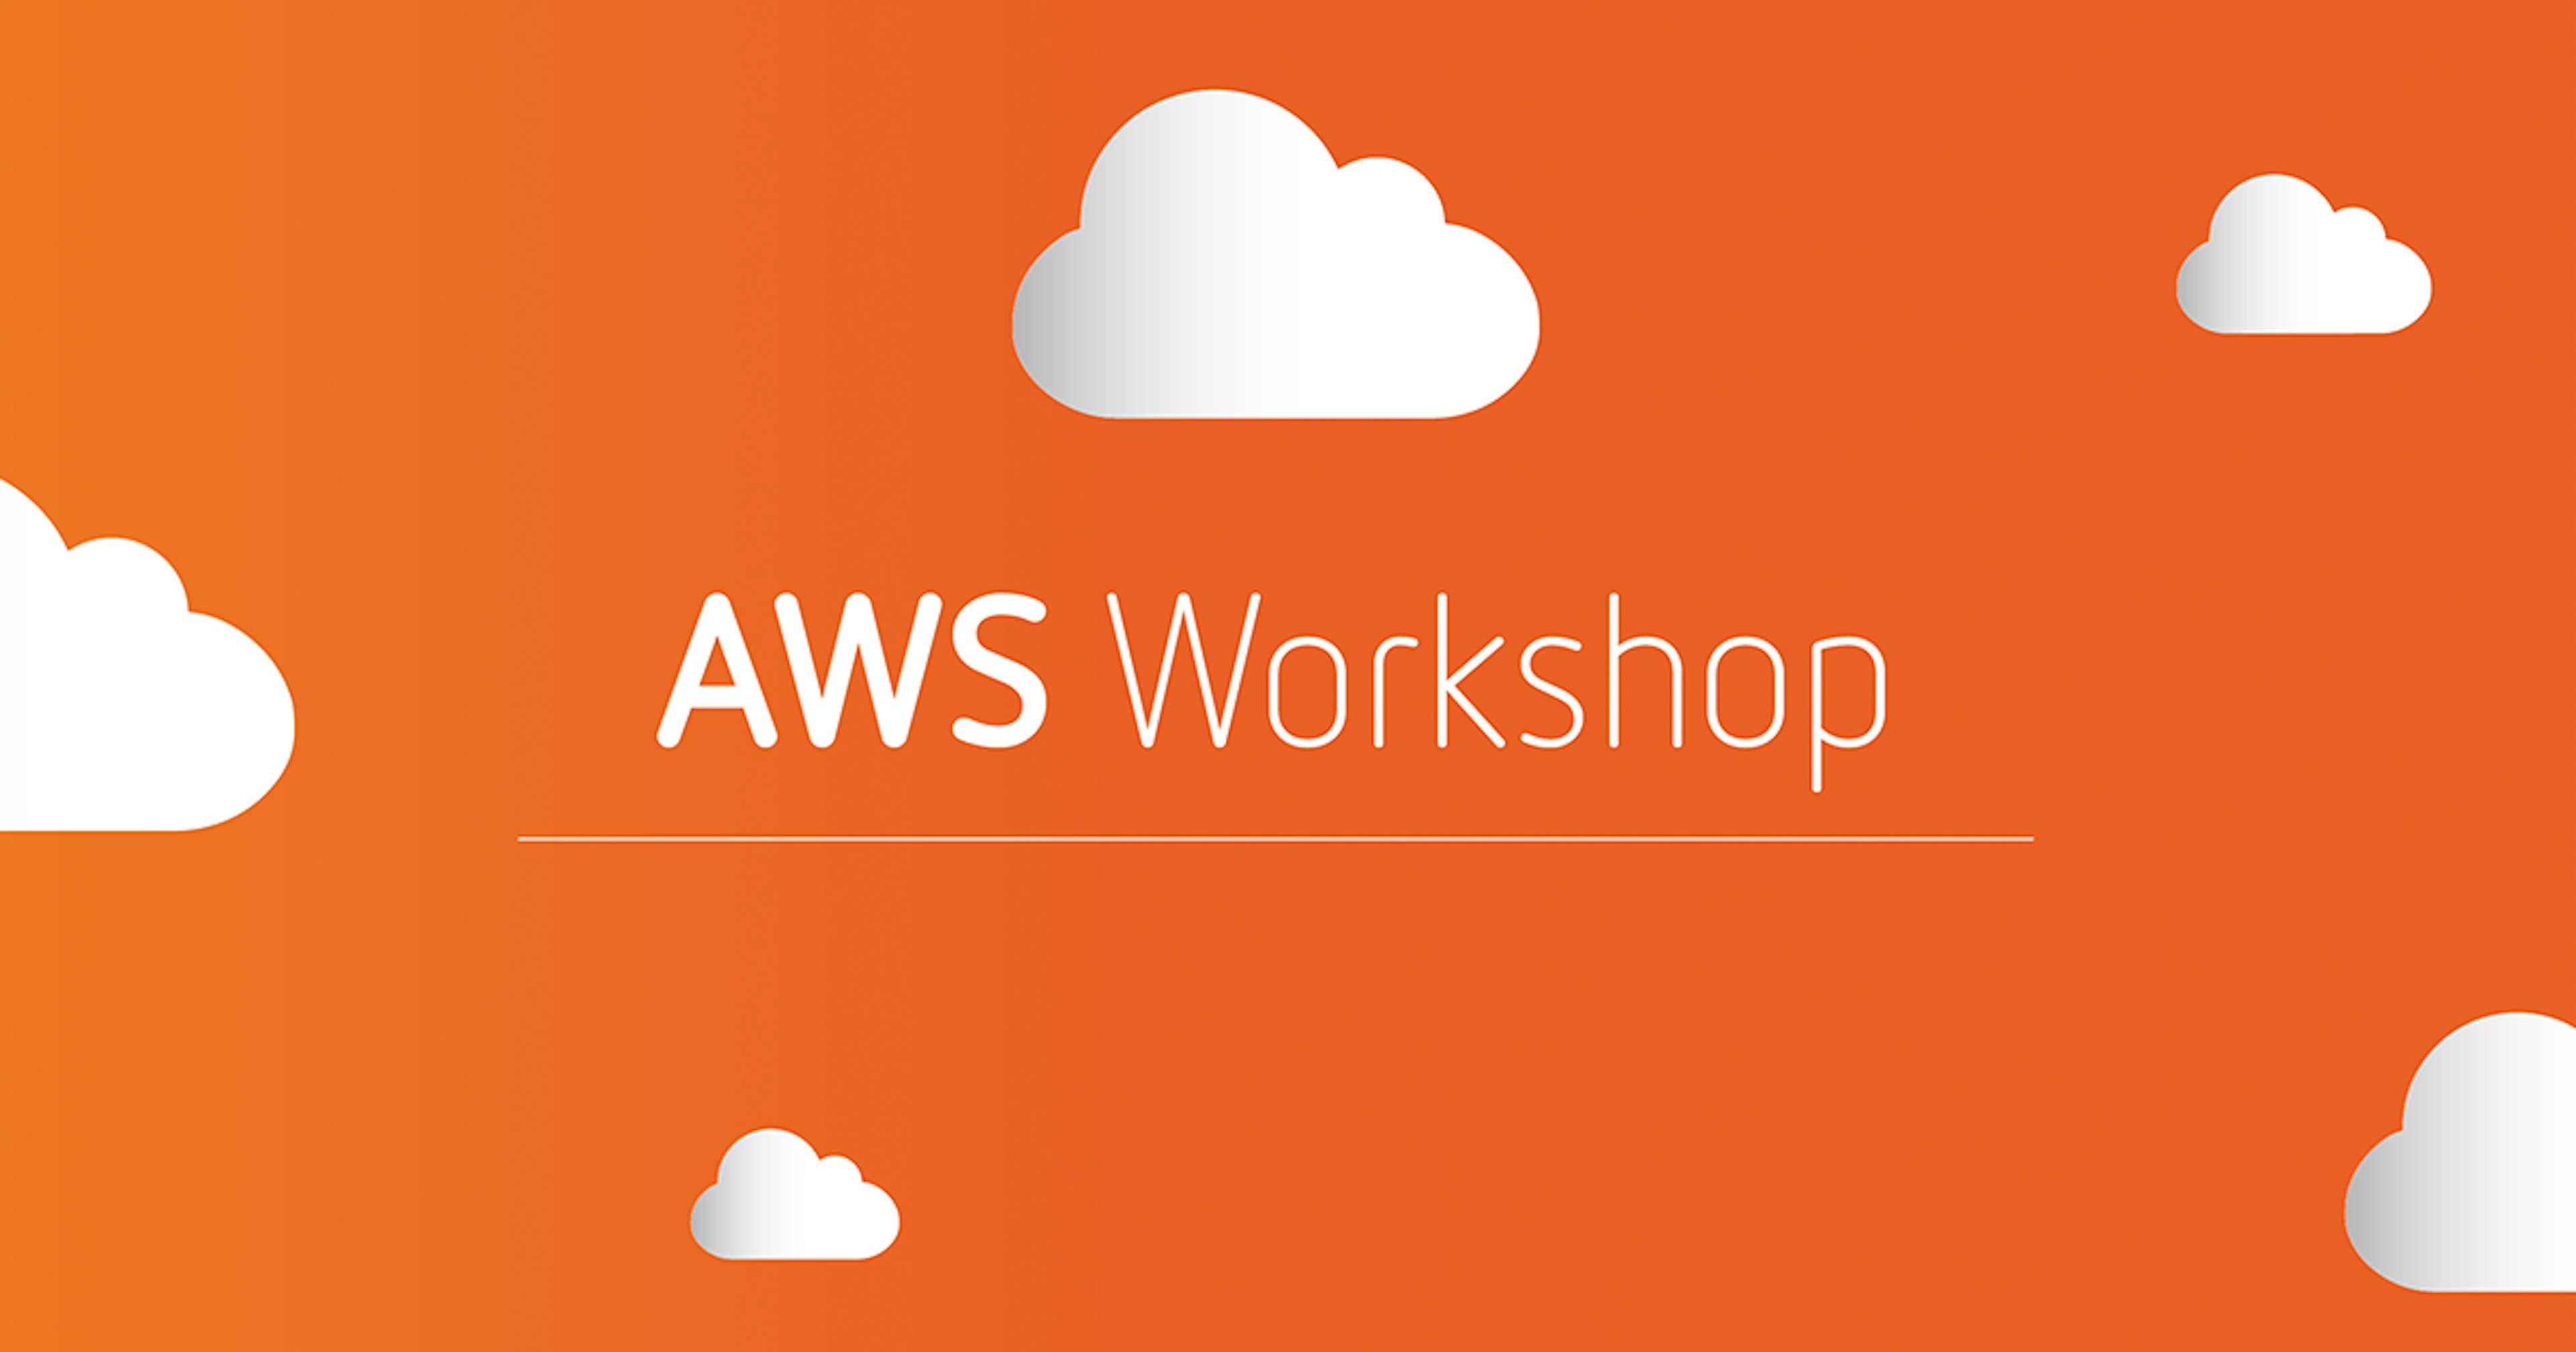 /assets/blog/2018-06-21-getting-started-with-aws-open-source-workshop/2018-06-21-aws-workshop-5b071298b4.png